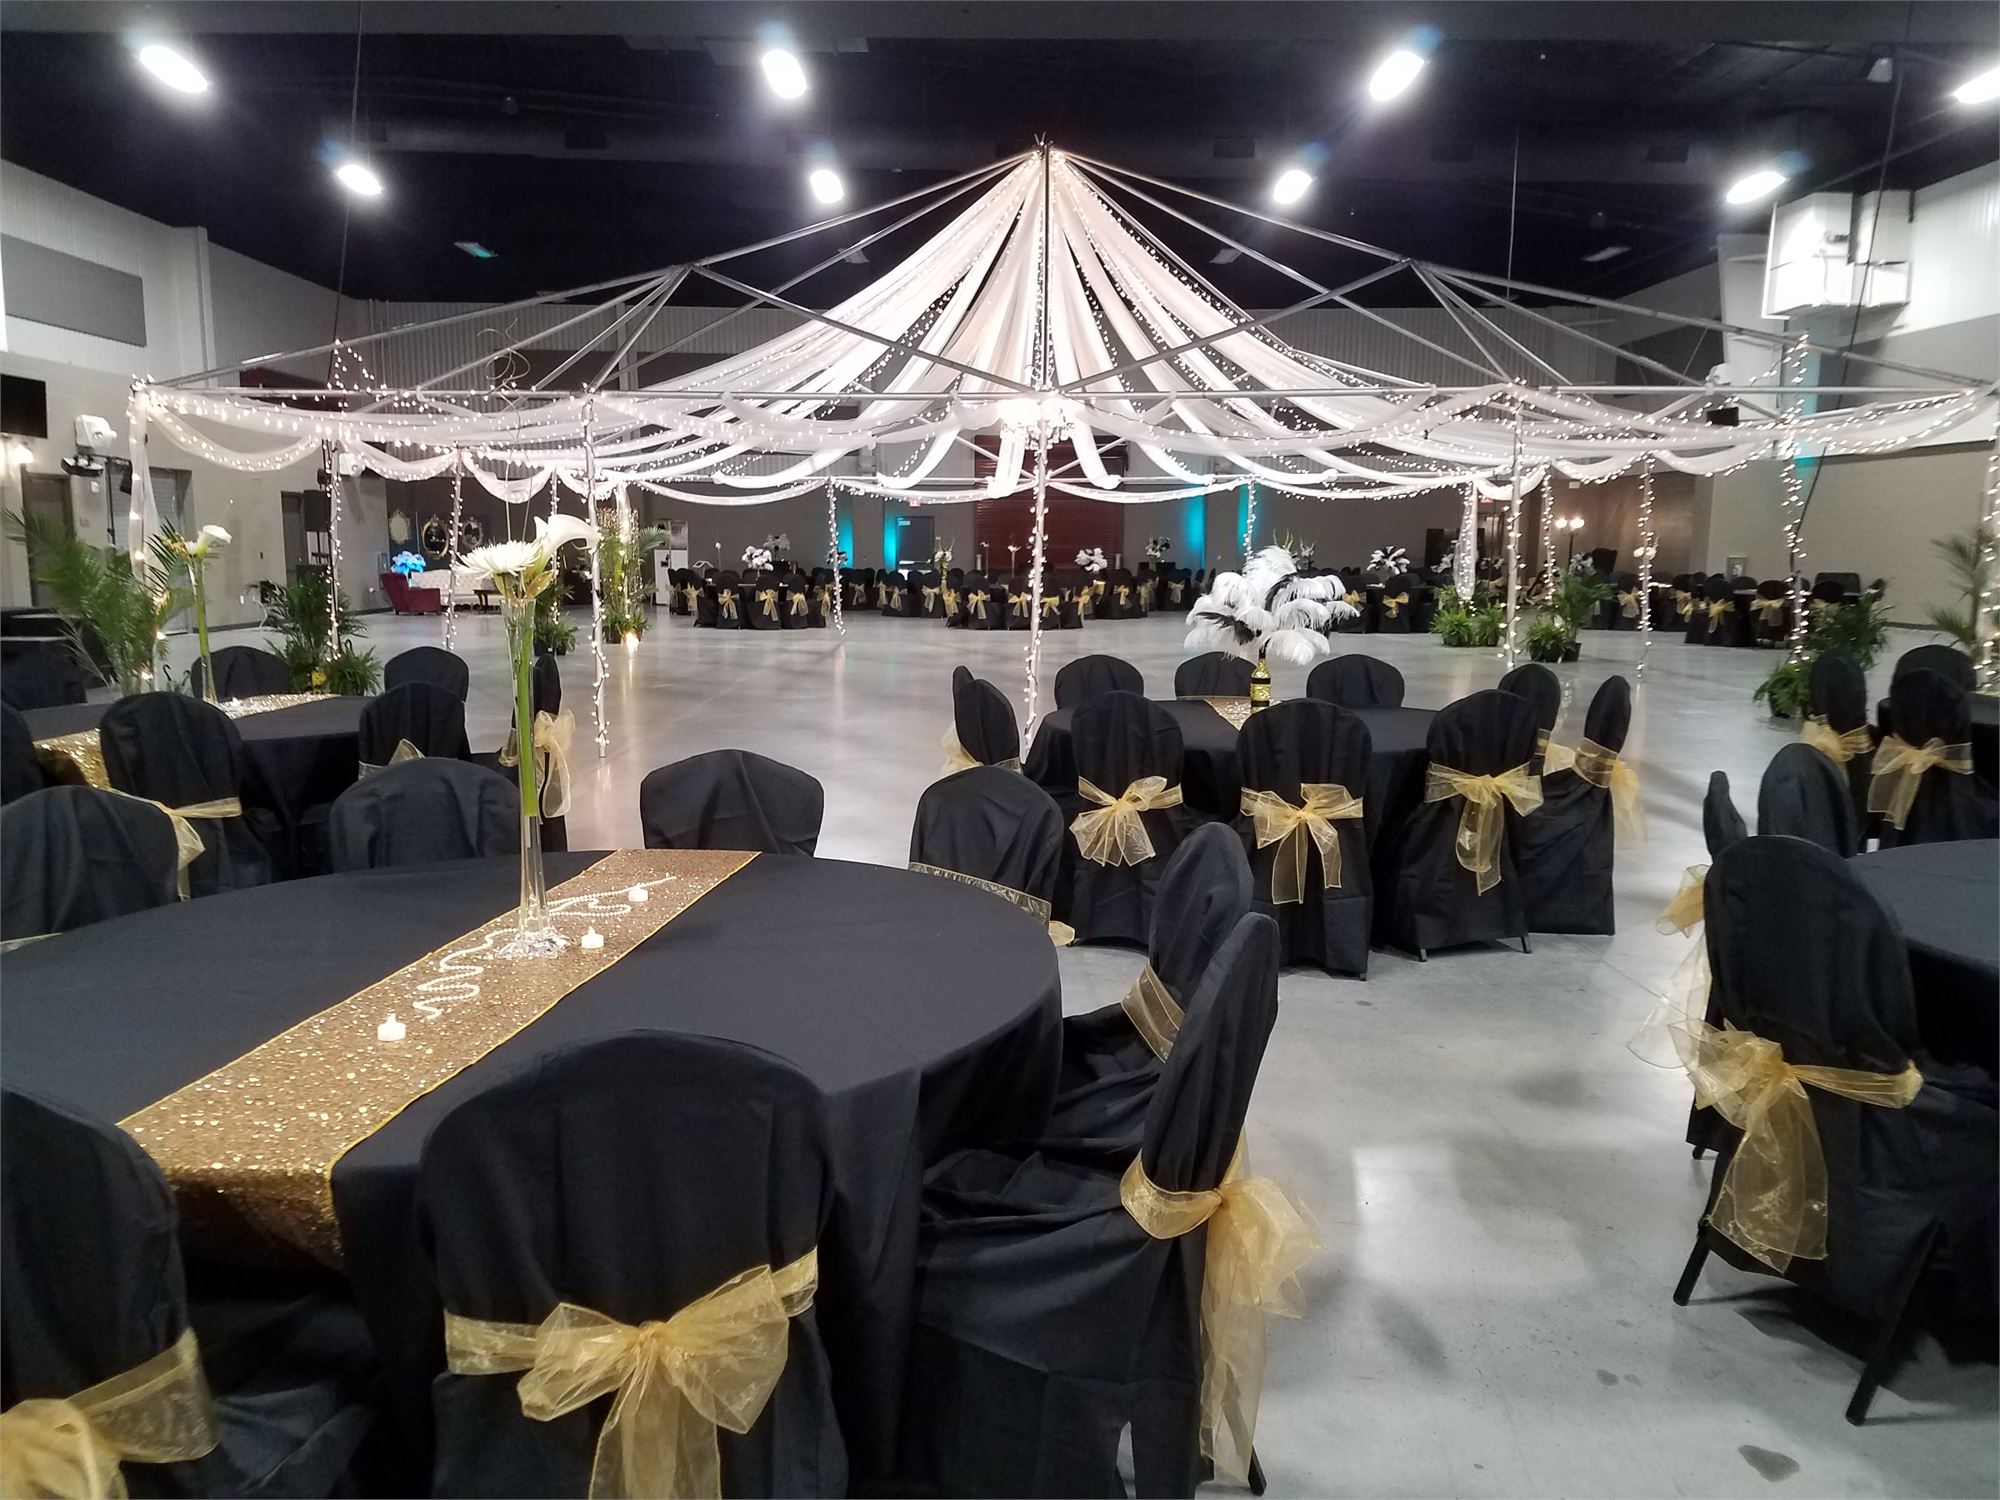 Indoor Expo Hall decorated for the Taylor Prom. Tables covered in black table clothes and a canopy with lights over the dance floor